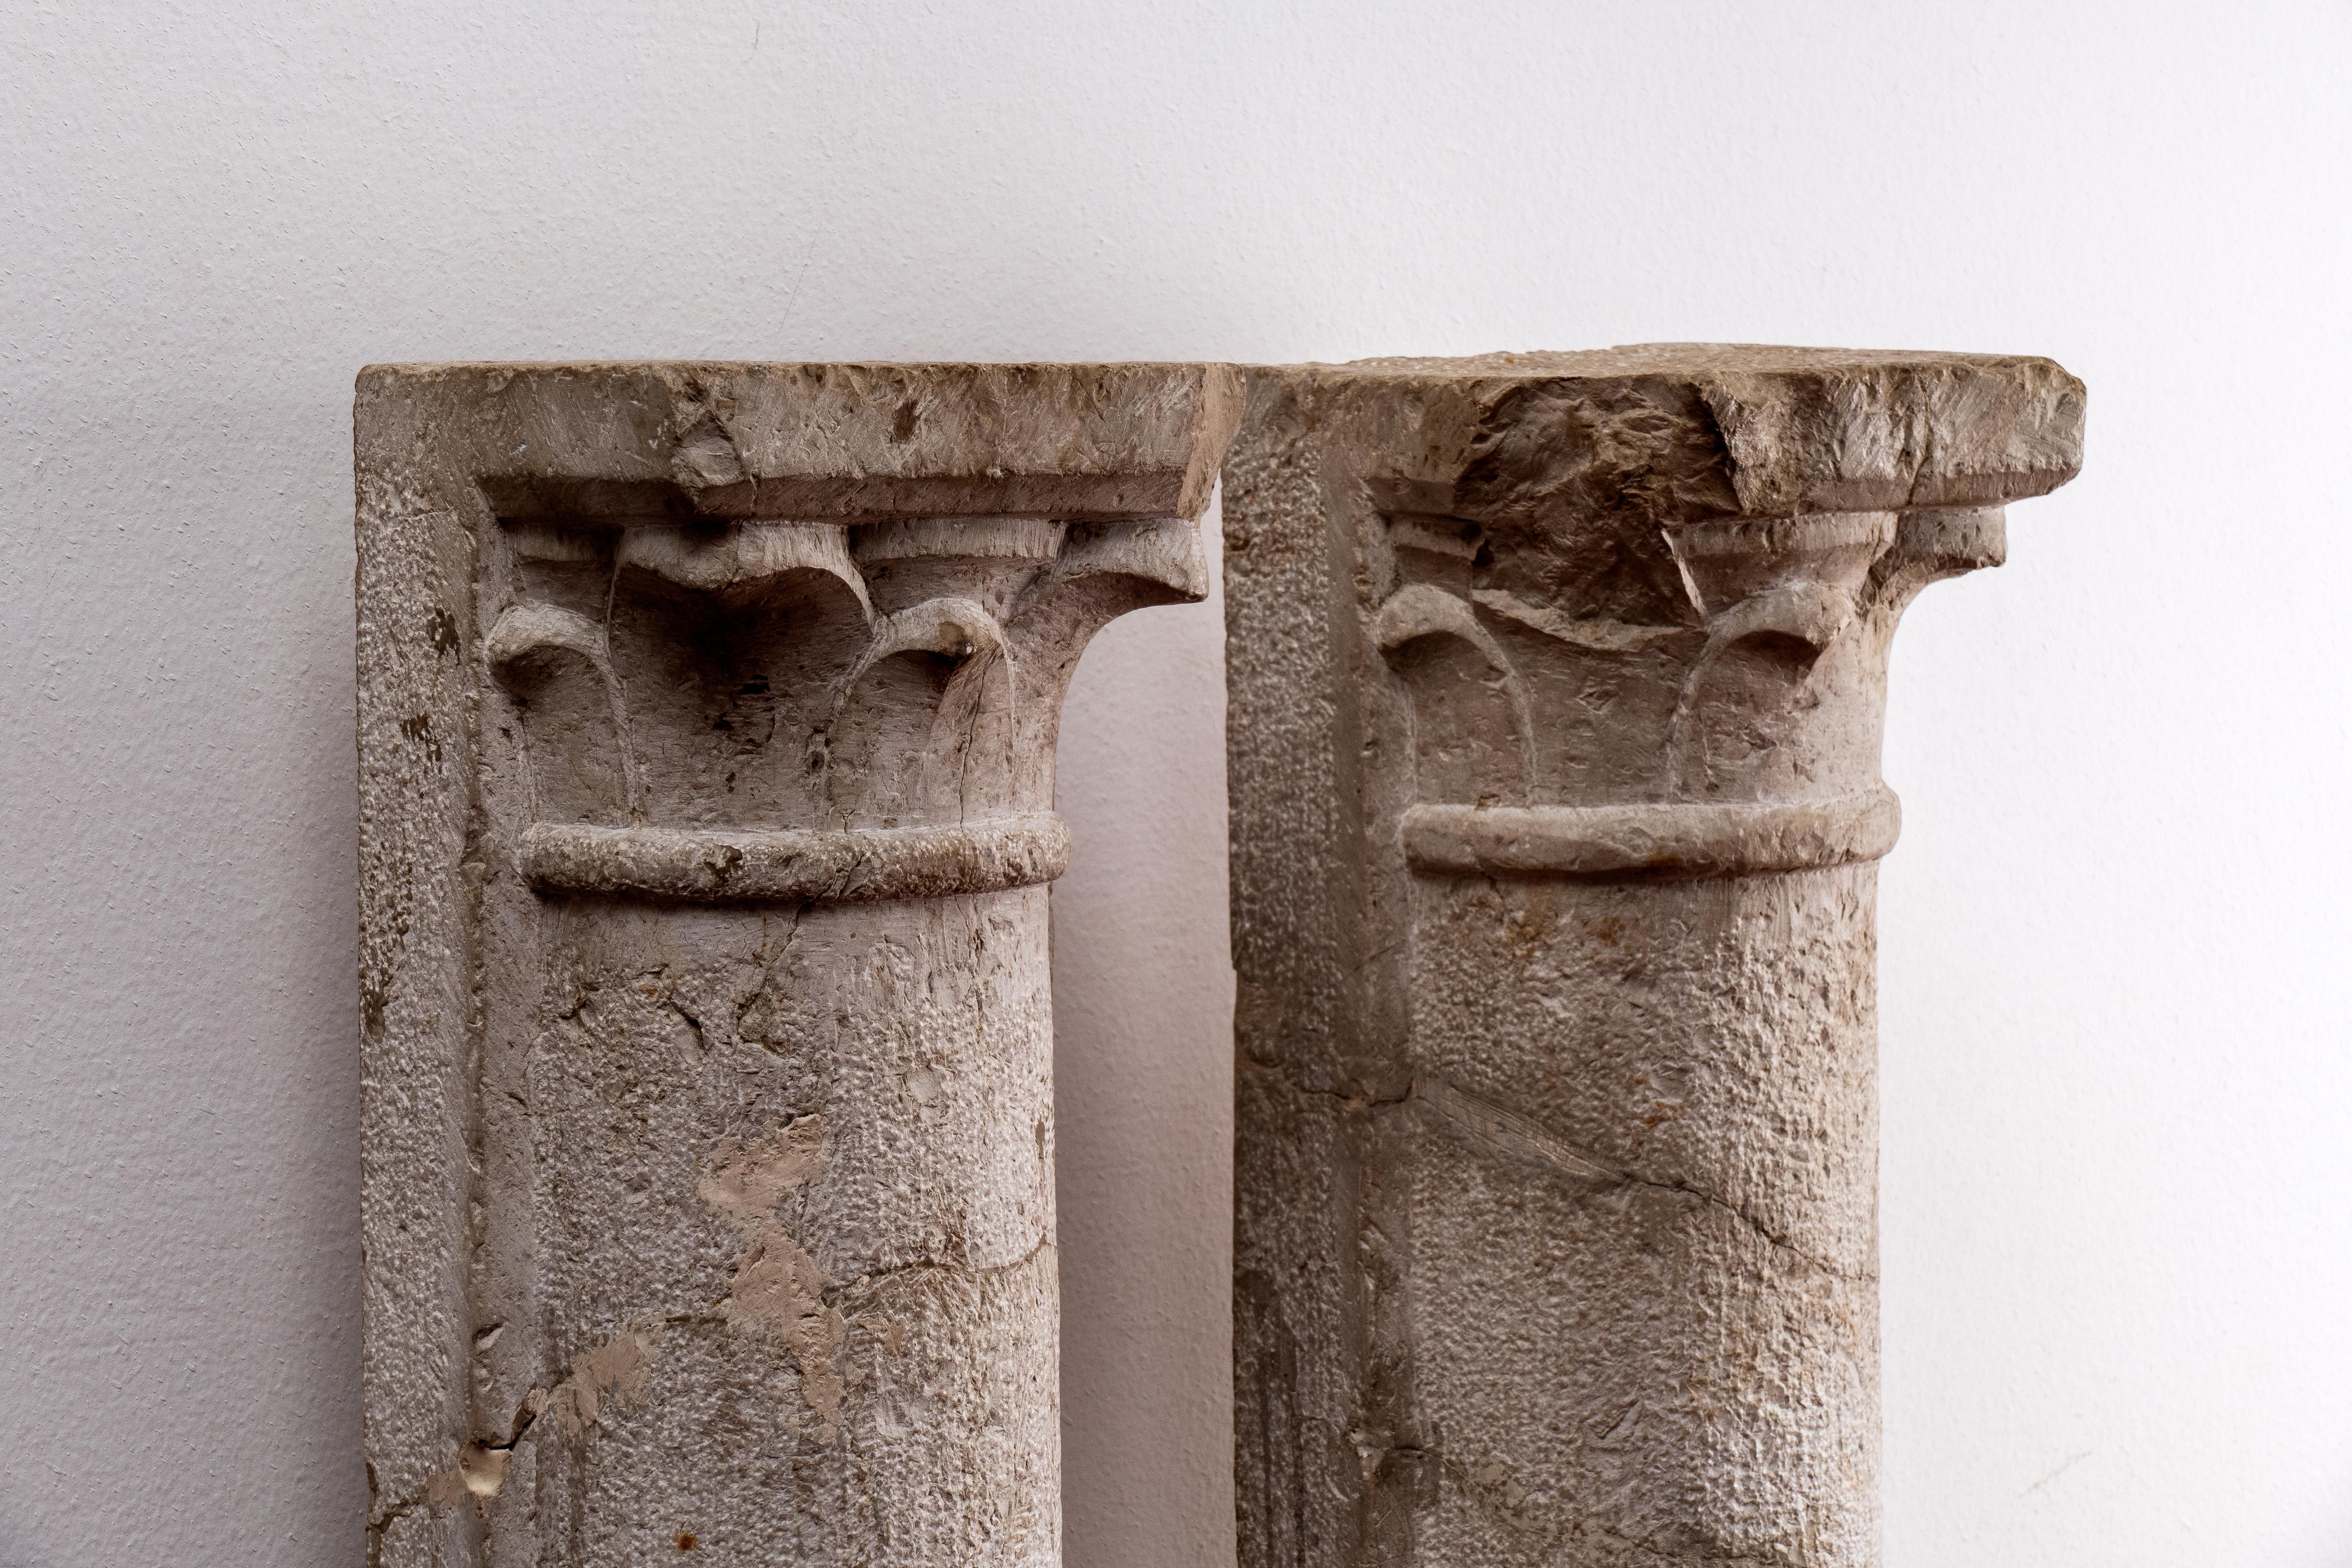 PAIR OF ROMANESQUE MARBLE COLUMNS, Italy, 13th/14th Century - Gray Figurative Sculpture by Unknown